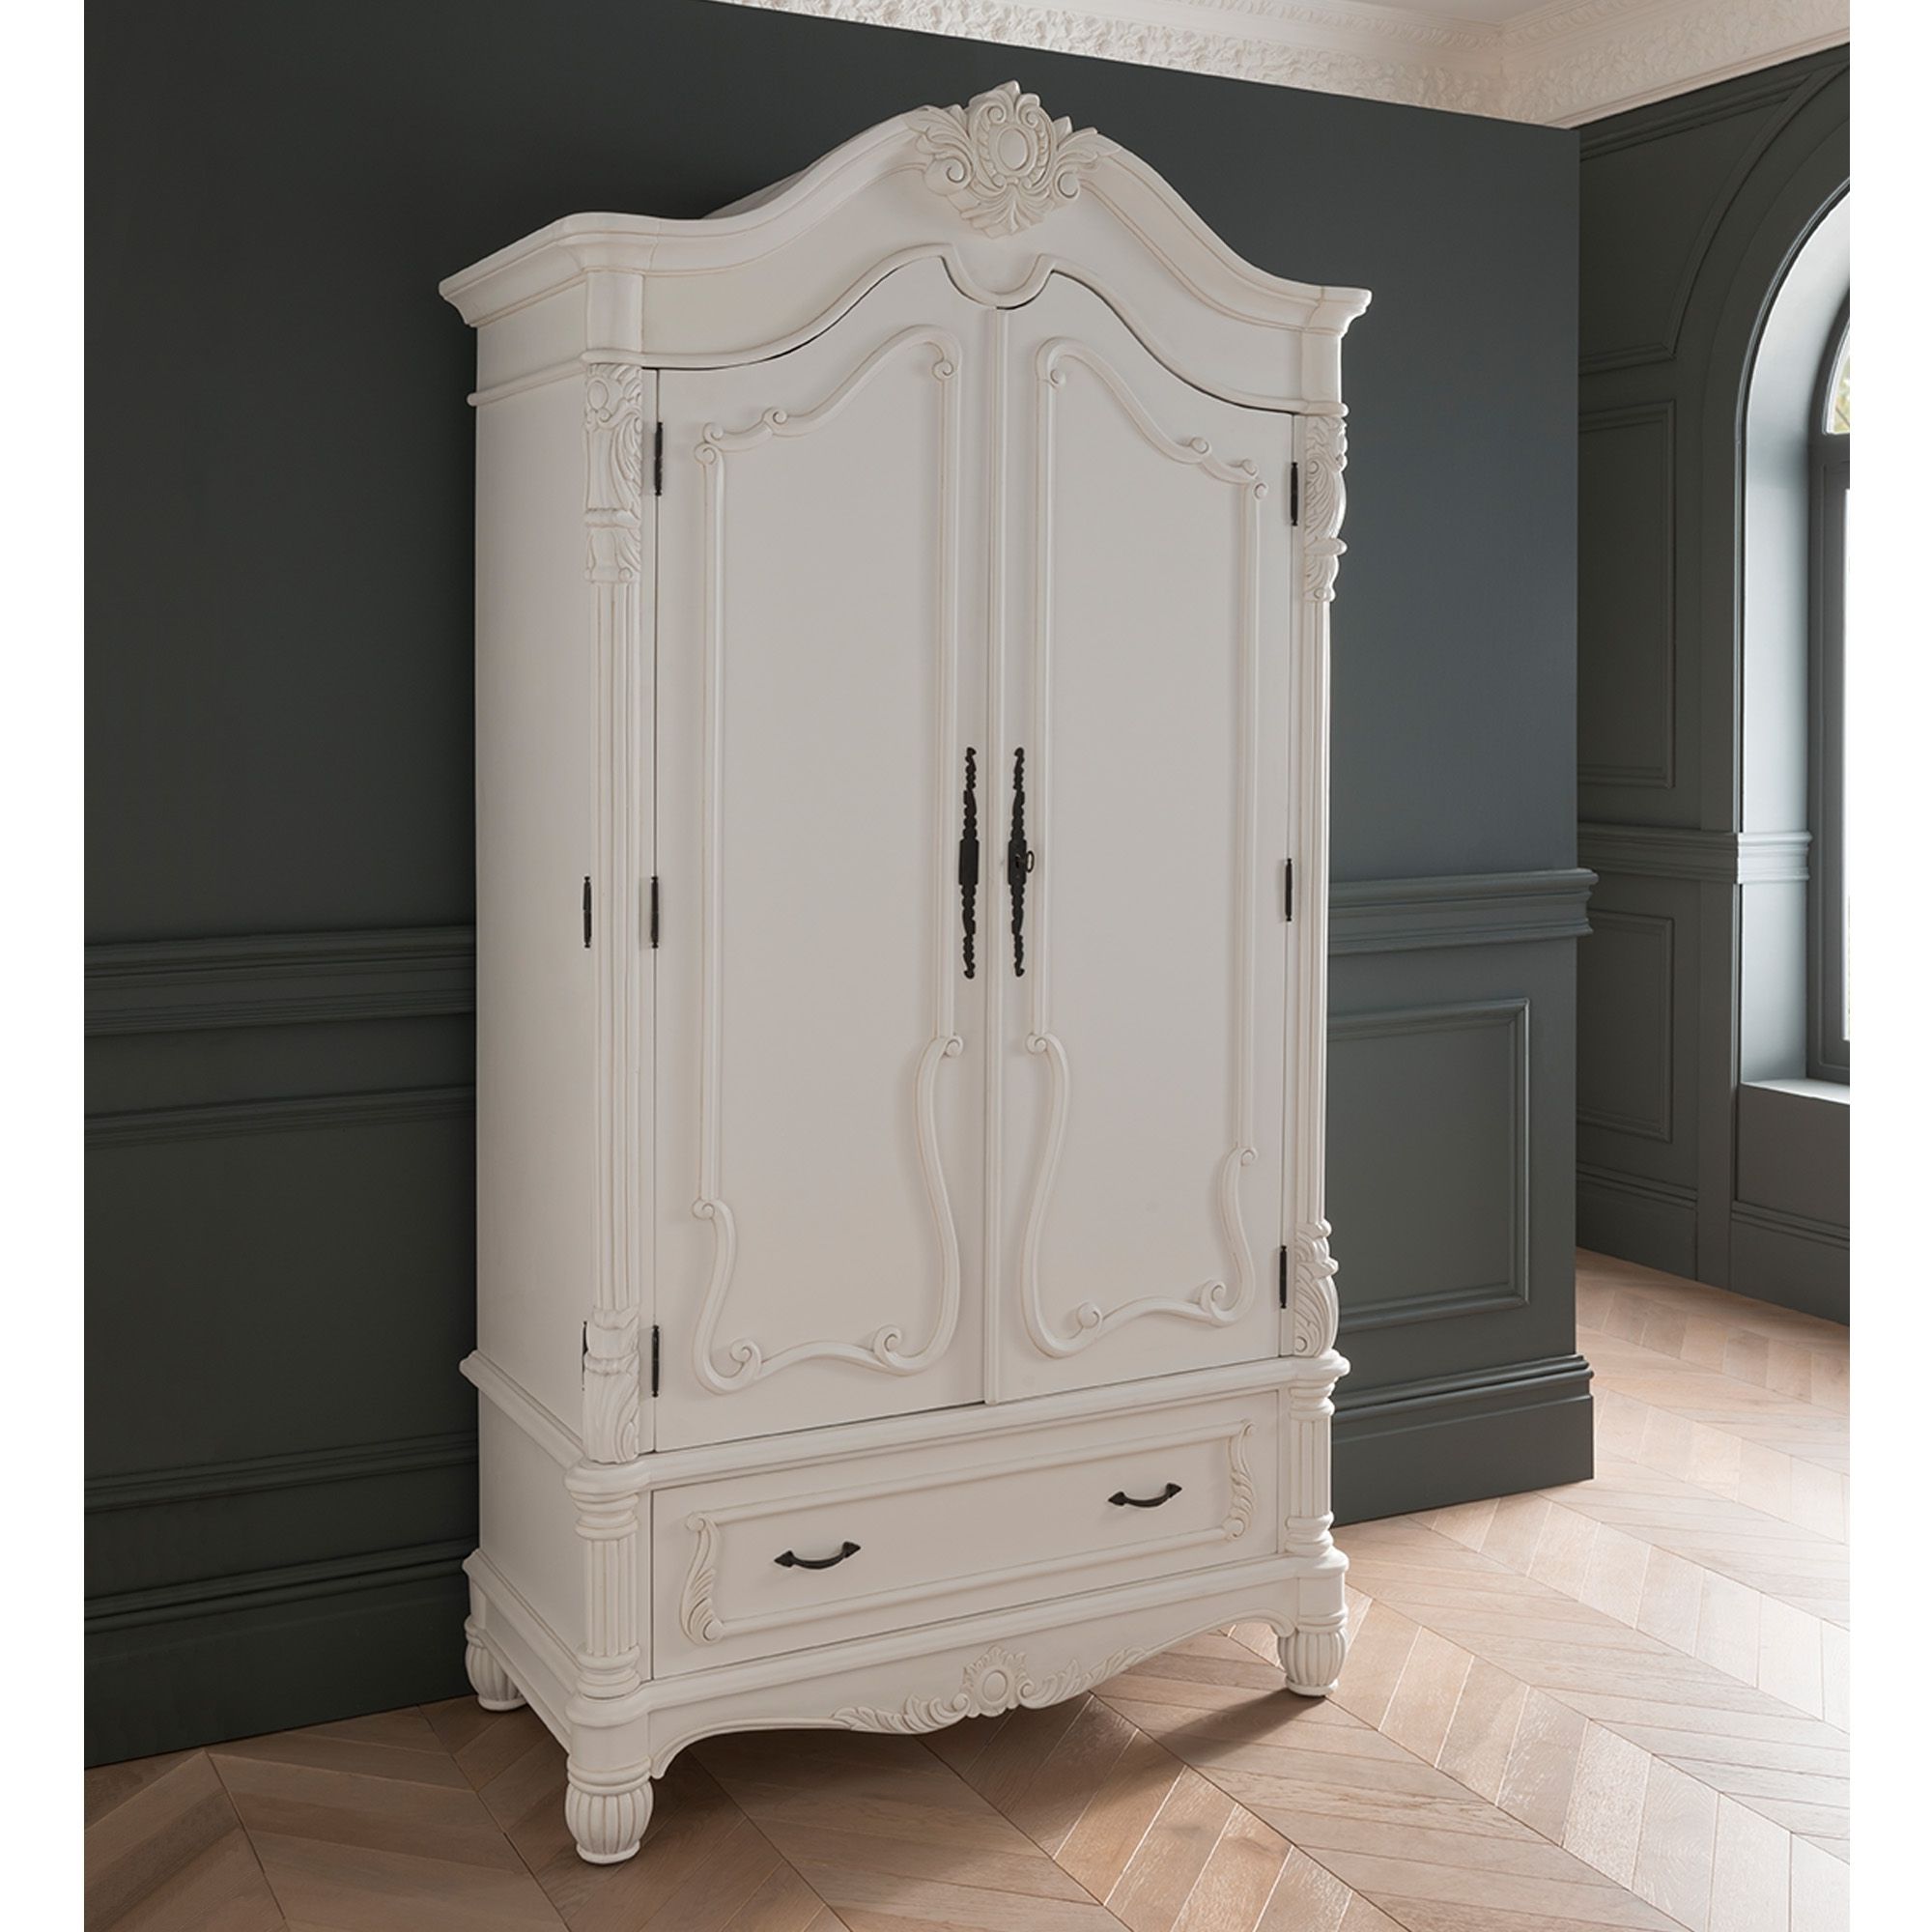 Antique French Style White Finished 1 Drawer Wardrobe | Homesdirect365 In French Wardrobes (Gallery 17 of 20)